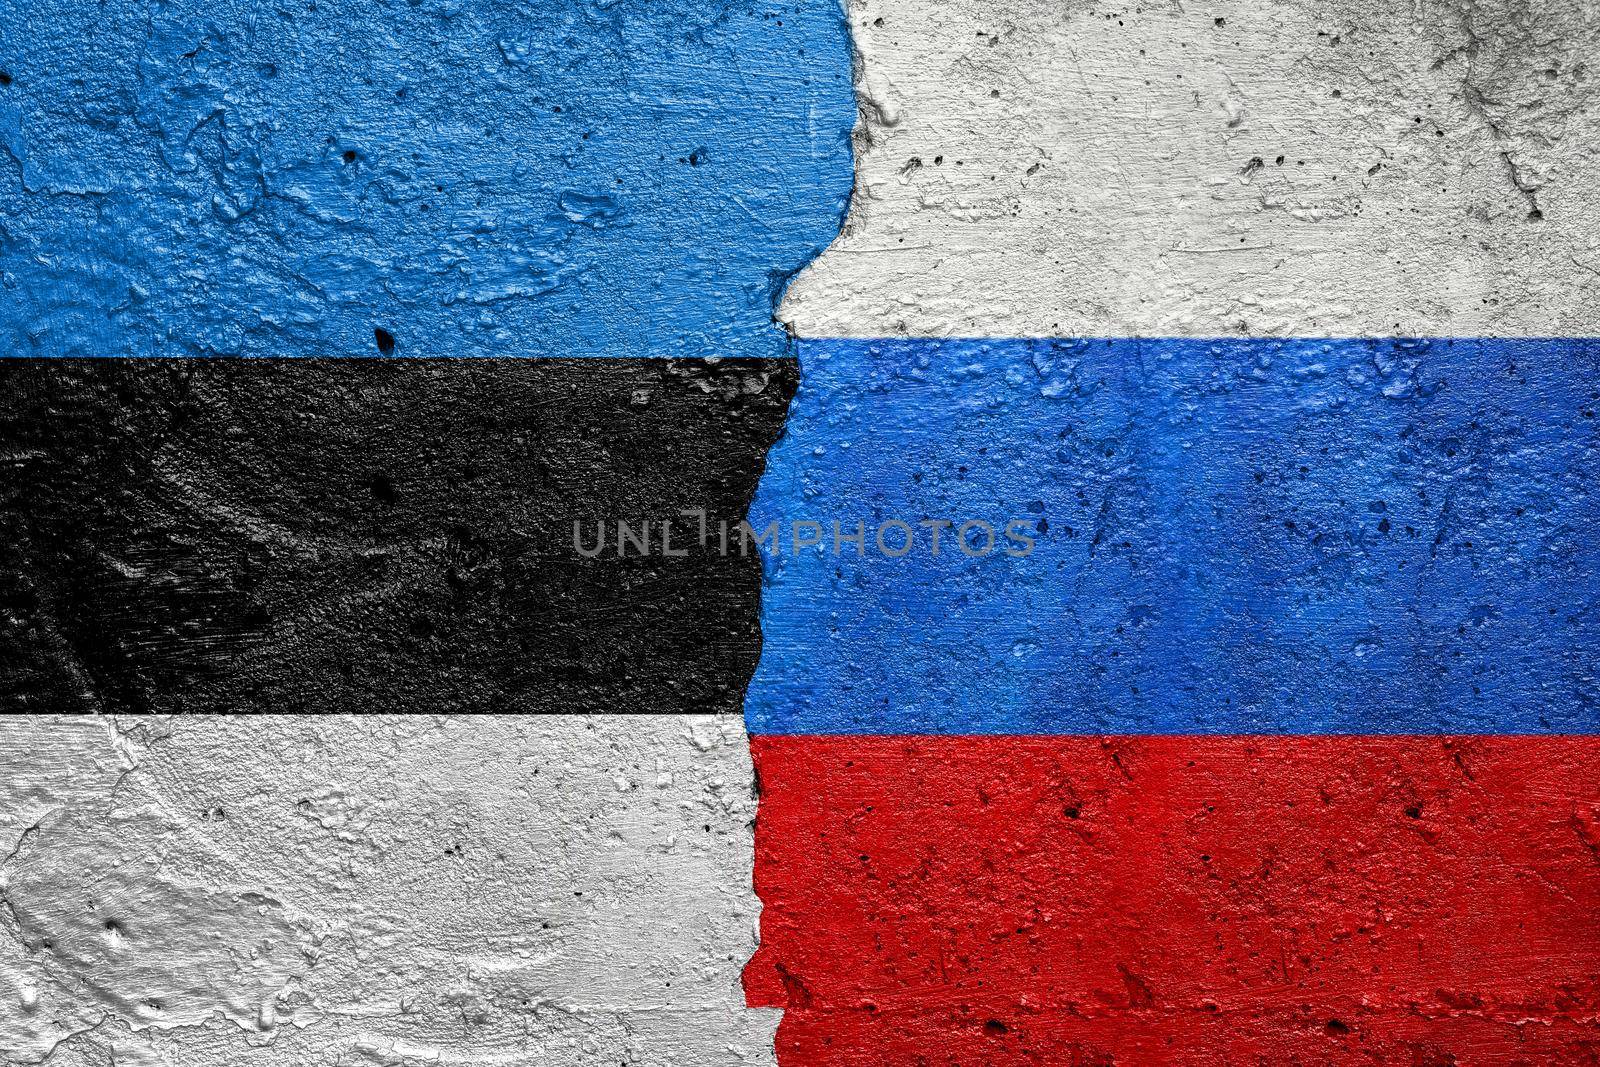 Estonia vs Russia - Cracked concrete wall painted with a Estonian flag on the left and a Russian flag on the right